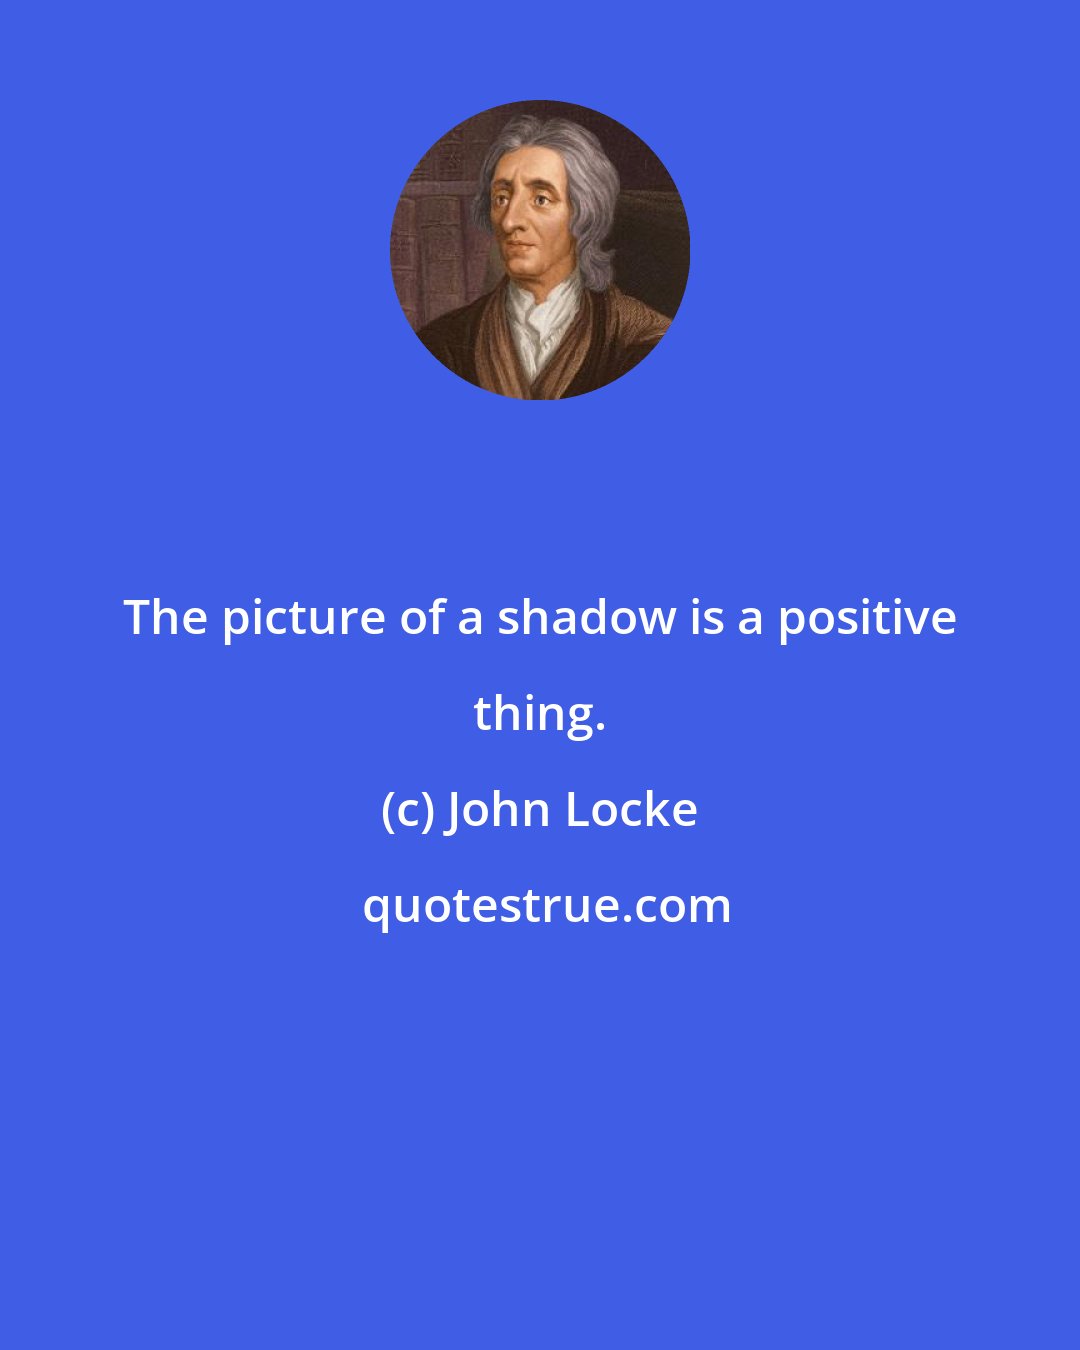 John Locke: The picture of a shadow is a positive thing.